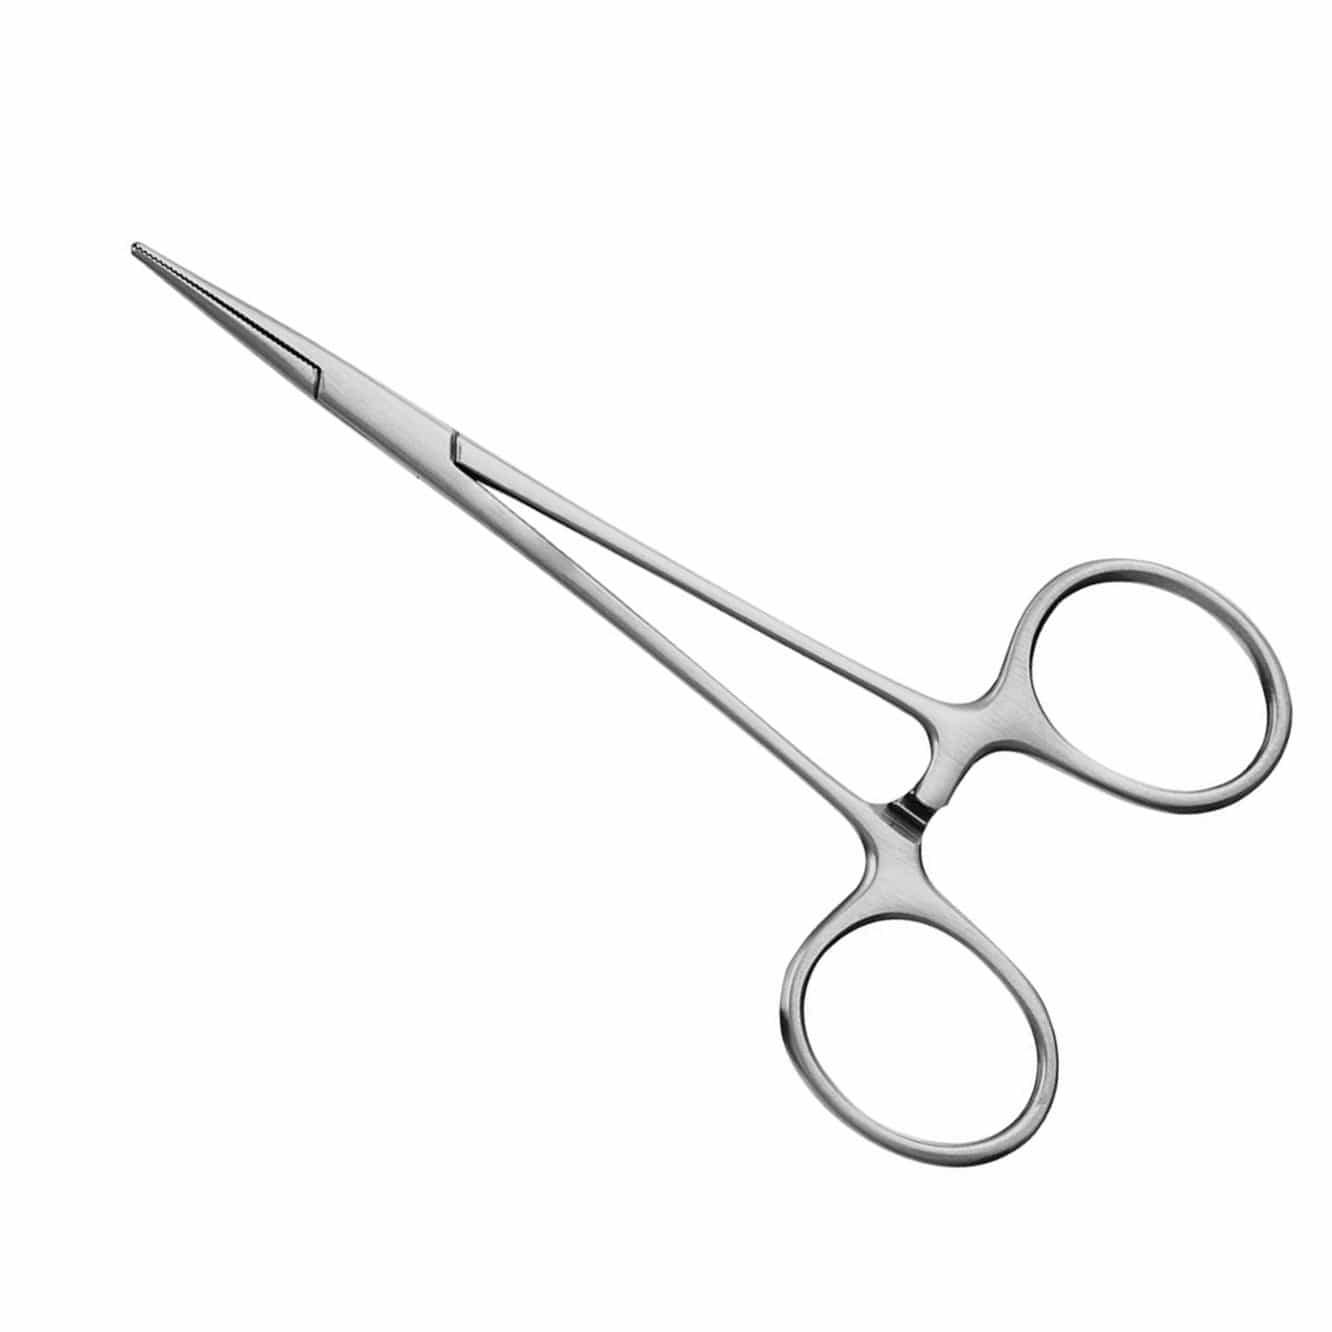 Armo Surgical Instruments Armo Halsted Mosquito Forceps